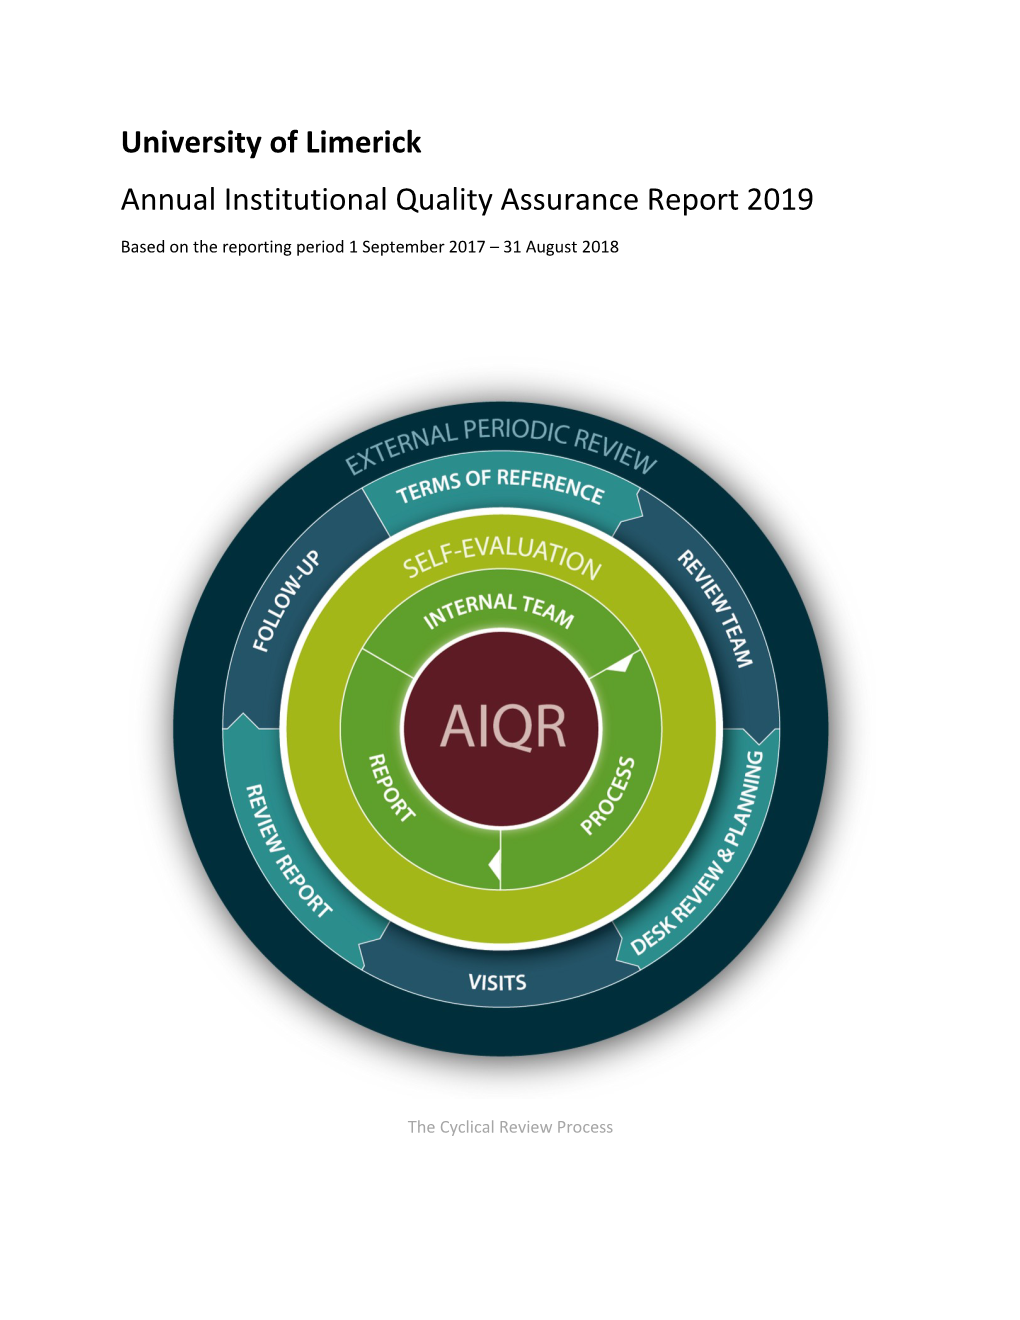 University of Limerick Annual Institutional Quality Assurance Report 2019